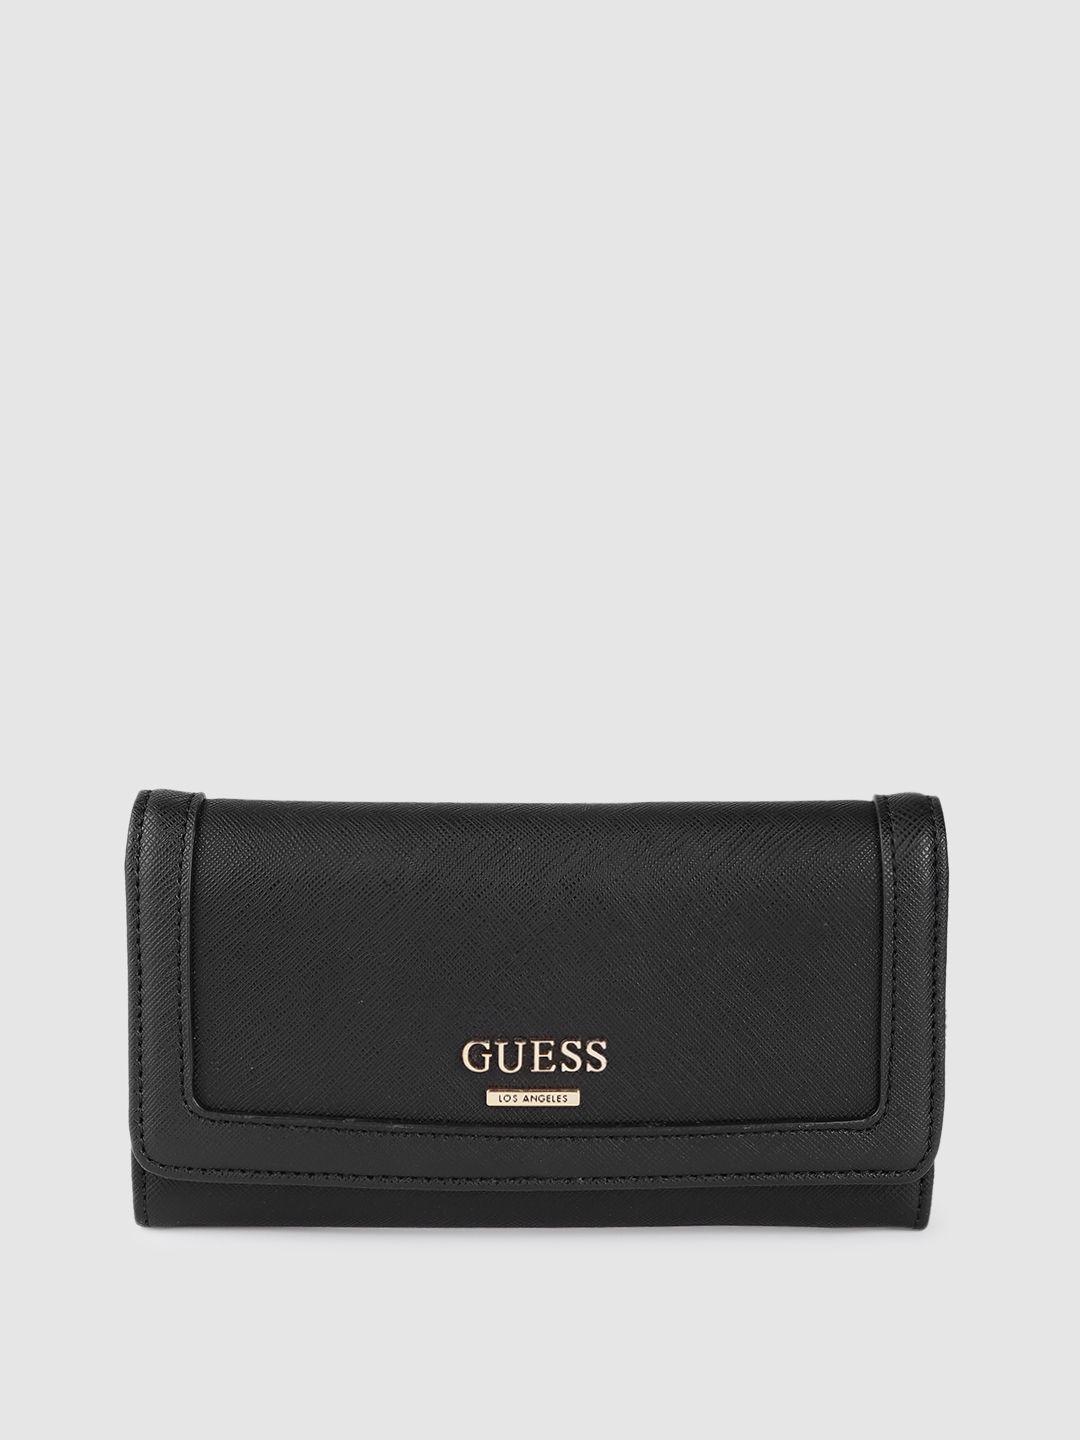 GUESS Women Black Saffiano Textured Three Fold Wallet Price in India